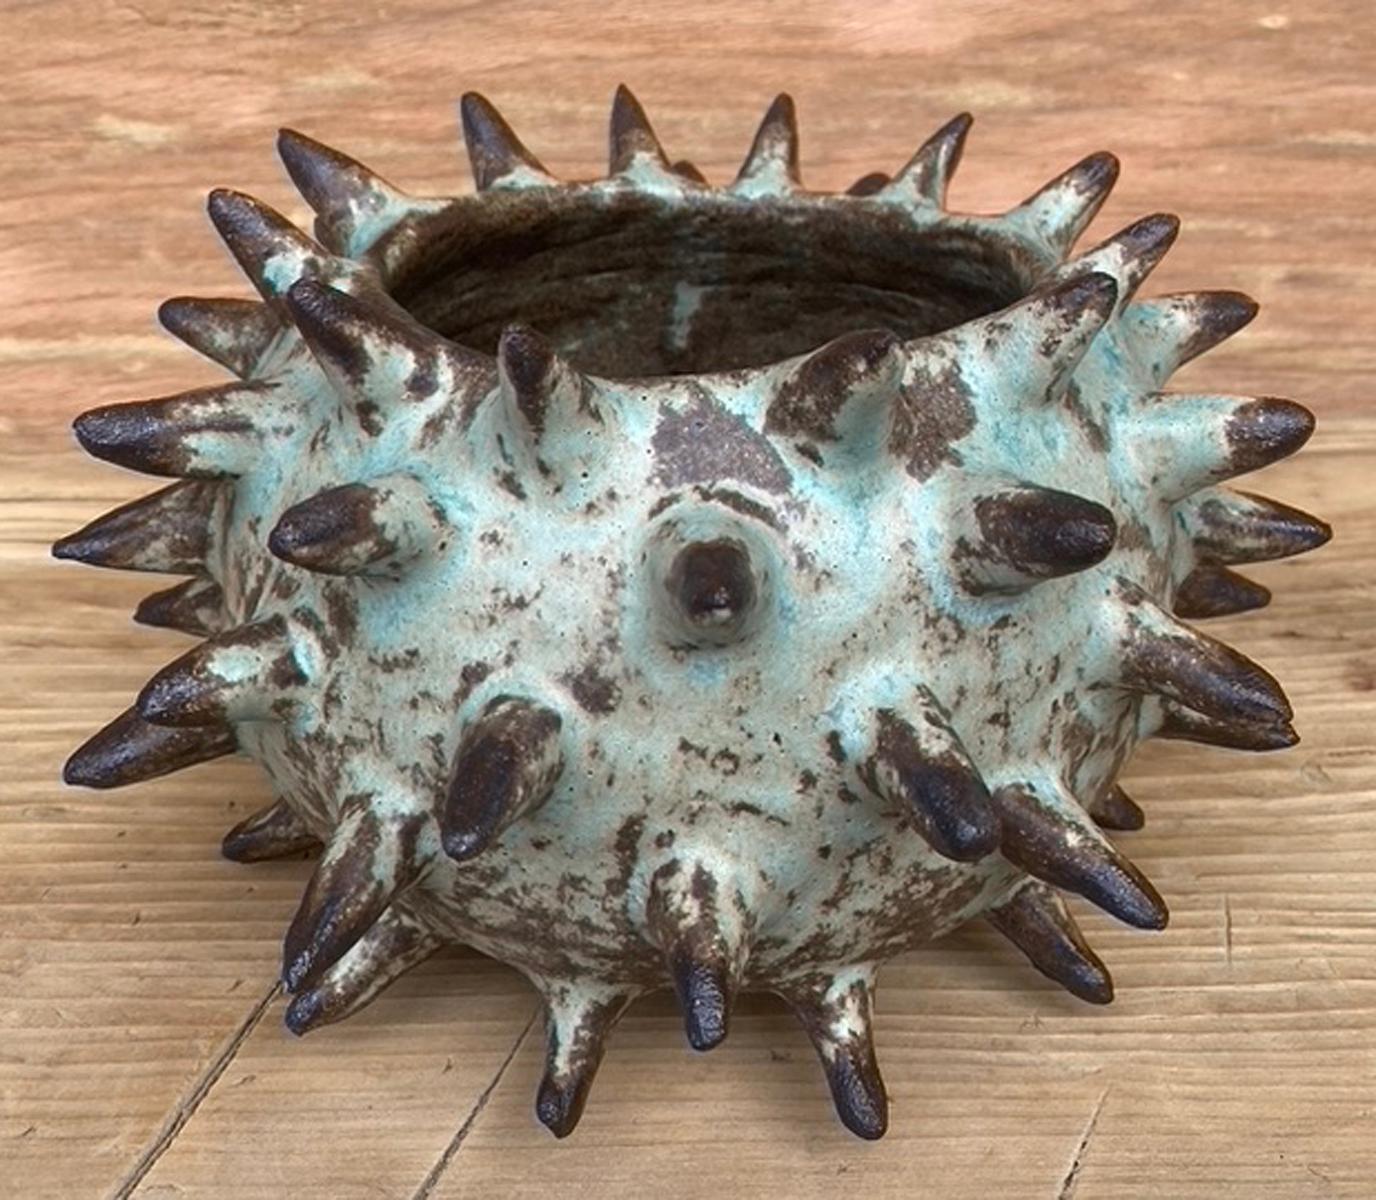 Hand built spike vessel. Glazed inside and outside. High fire. Cone 10.
Made by Santa Barbara based artist Sally Terrell. This particular one is part of a series with two other ceramics, see close up photos. Sold separately.